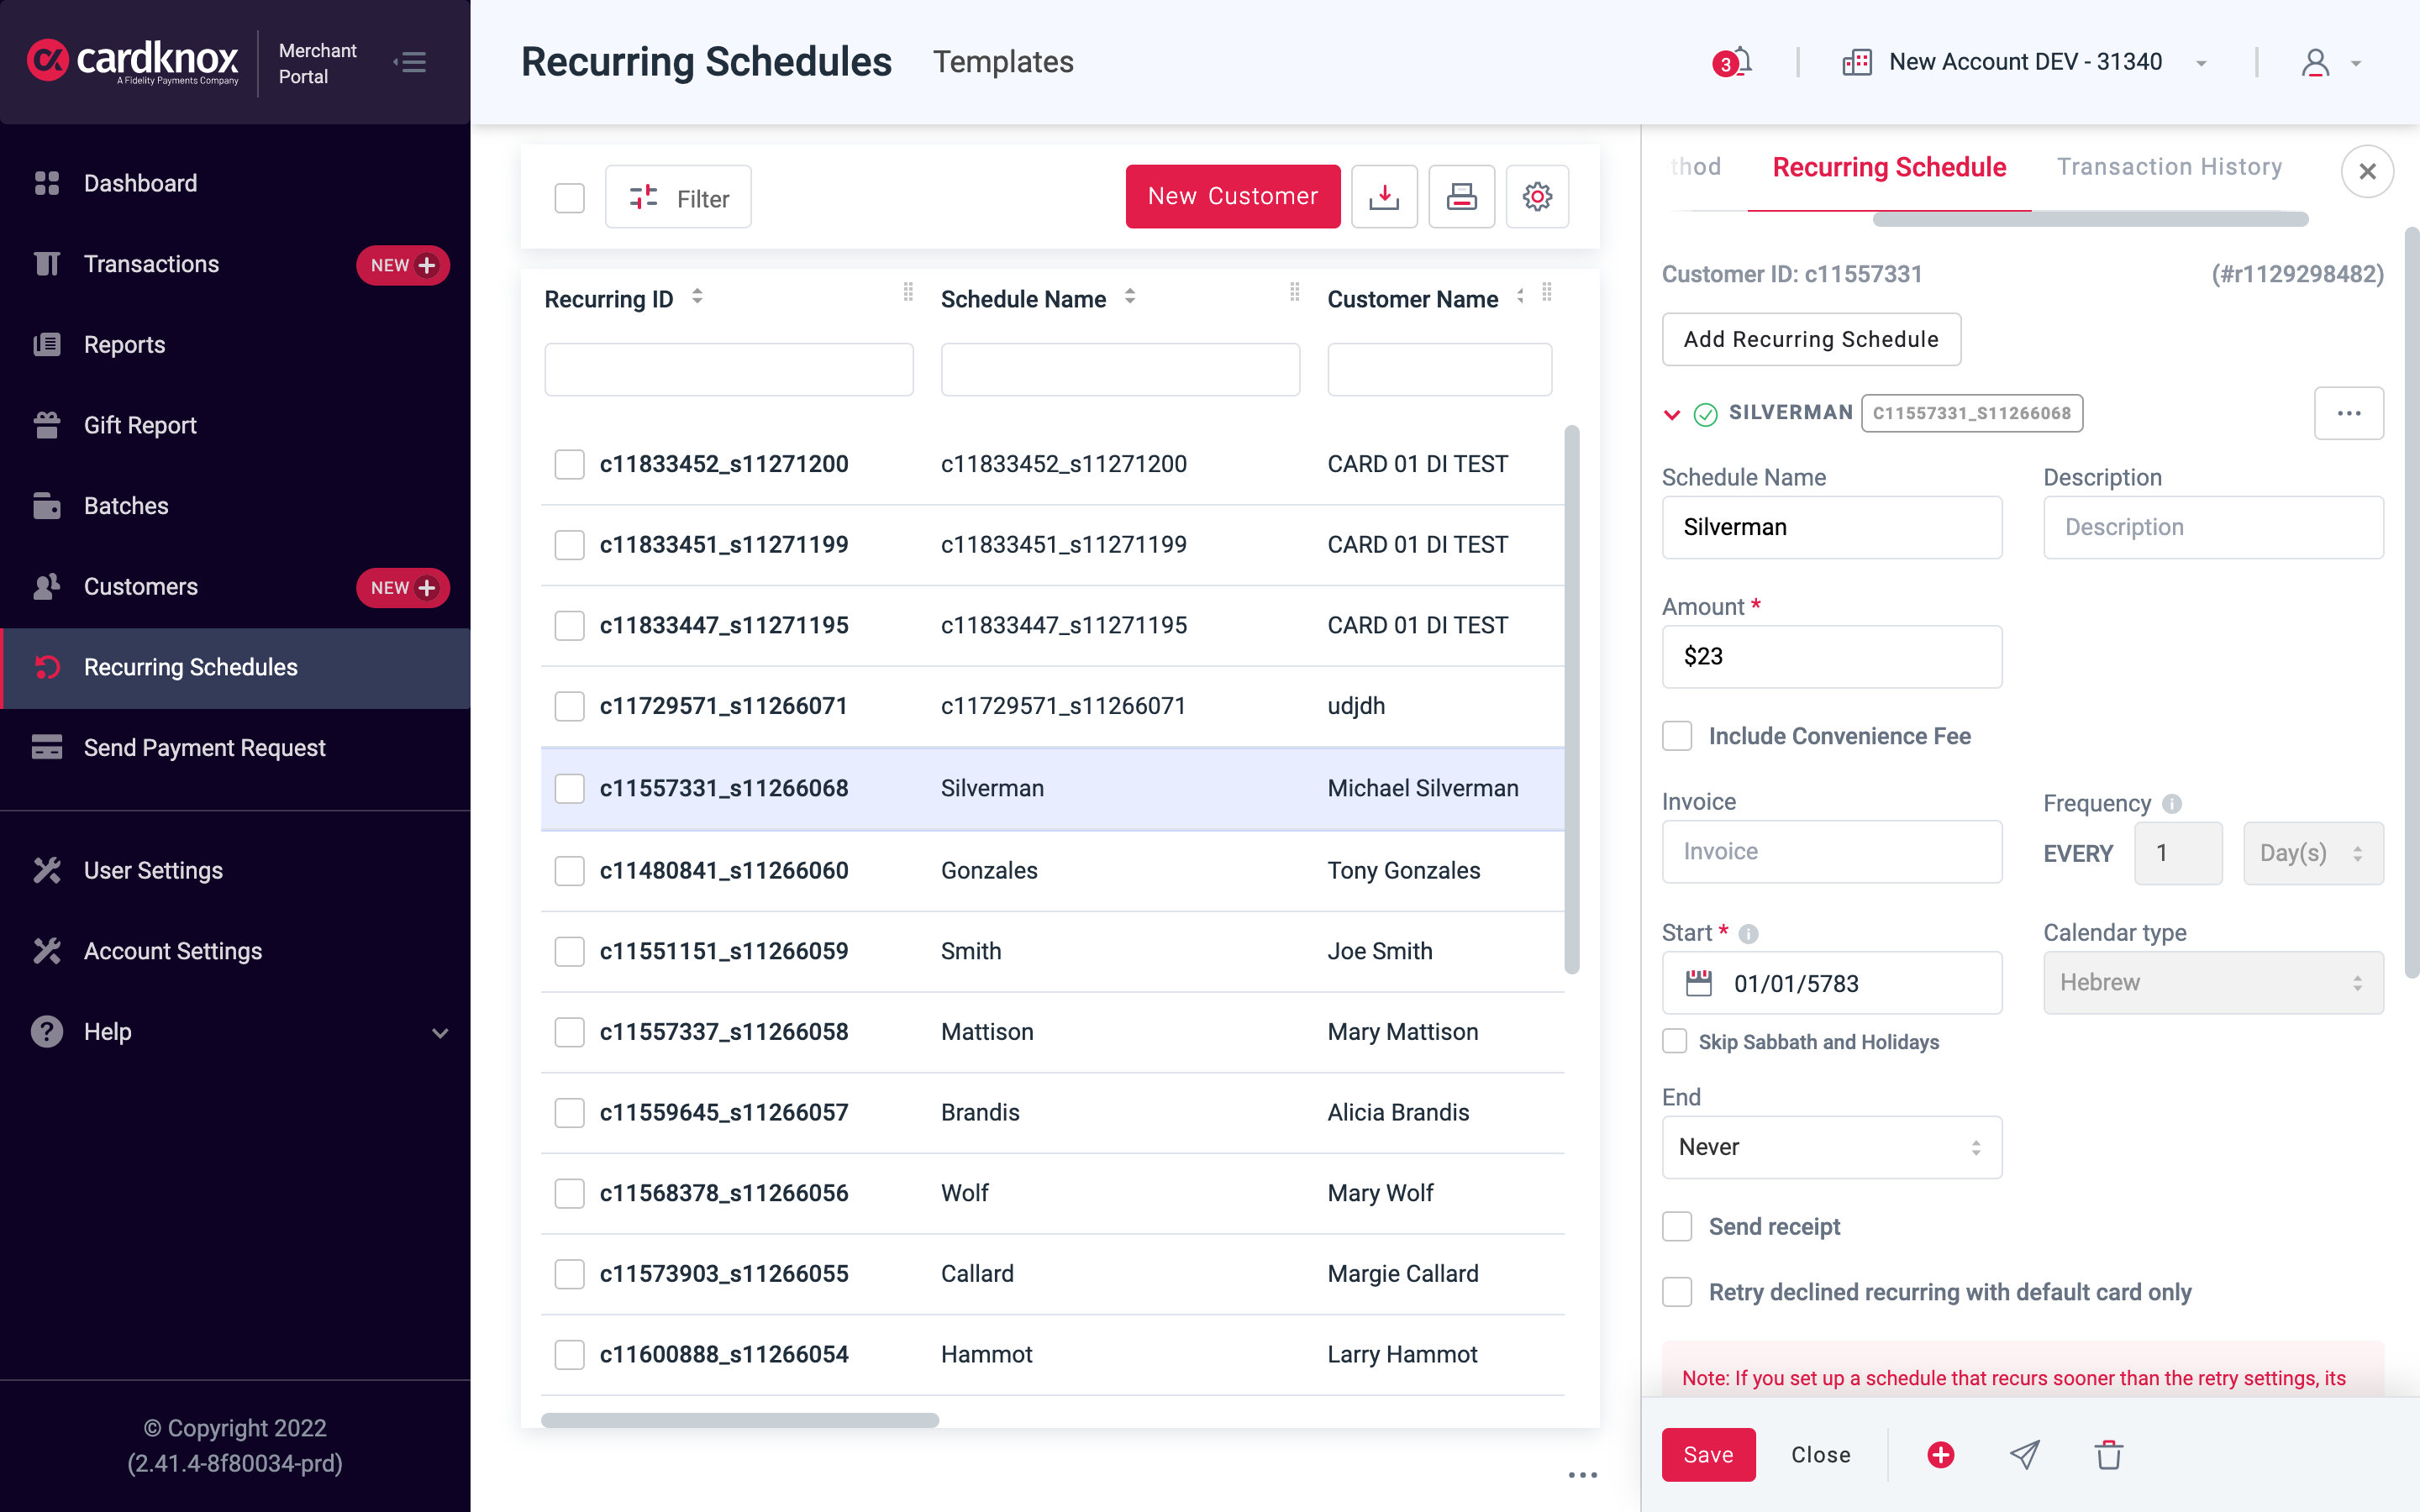 Cardknox Offers the Ability to Schedule Recurring Payments